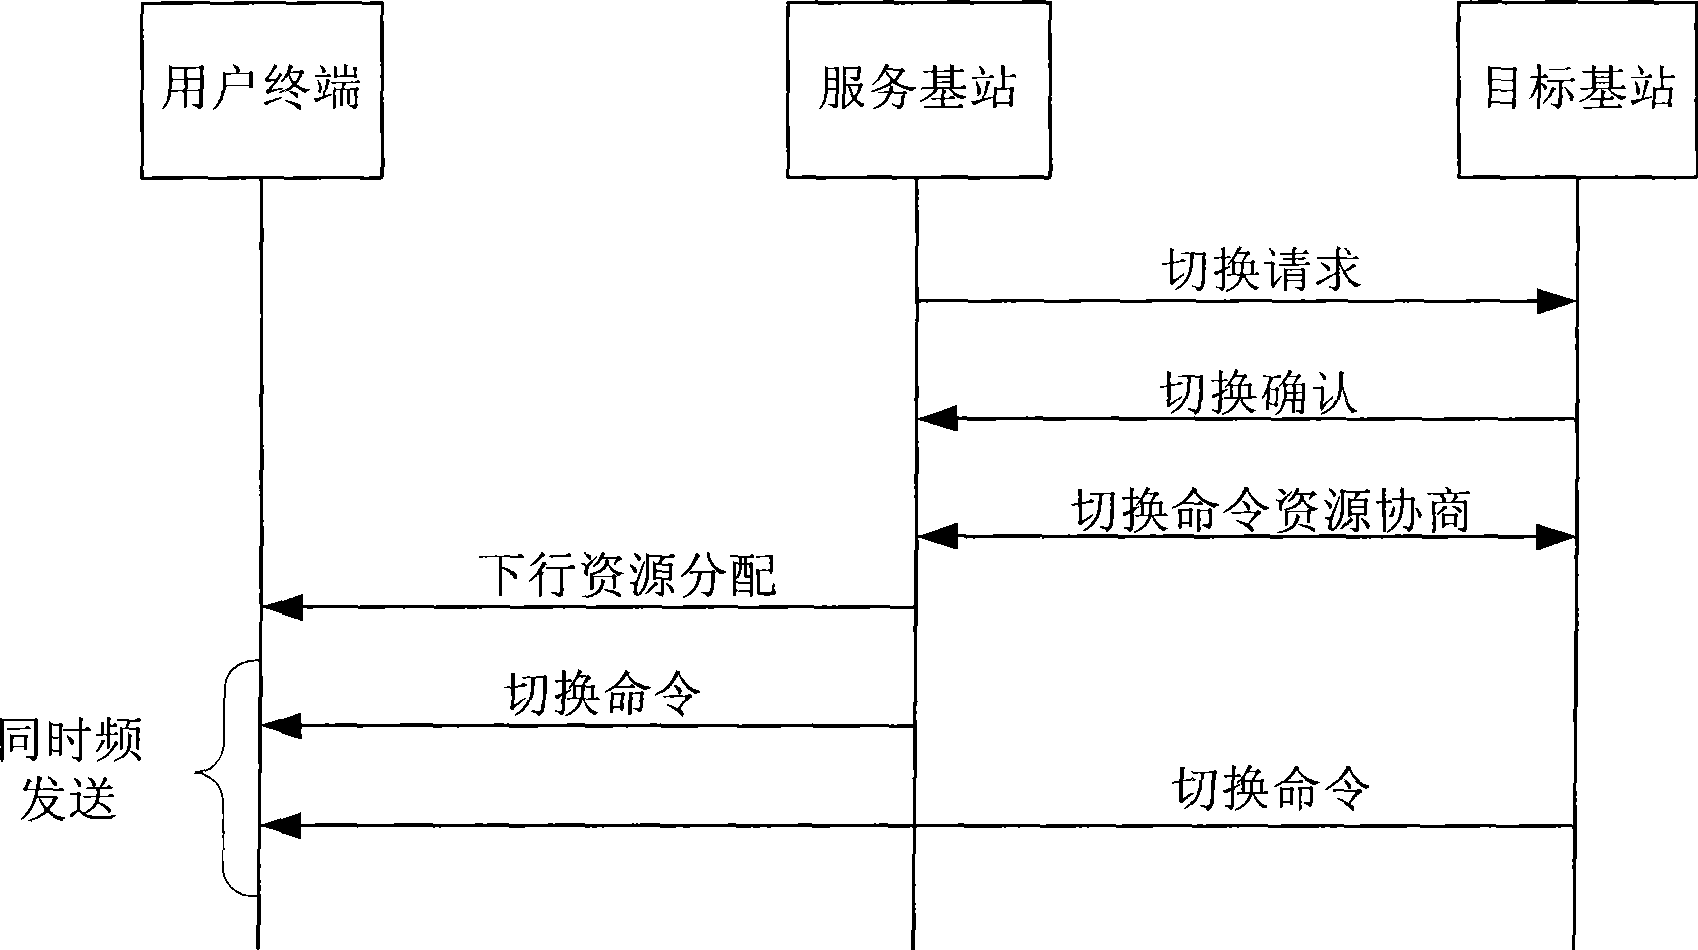 District switching method capable of improving switching success rate